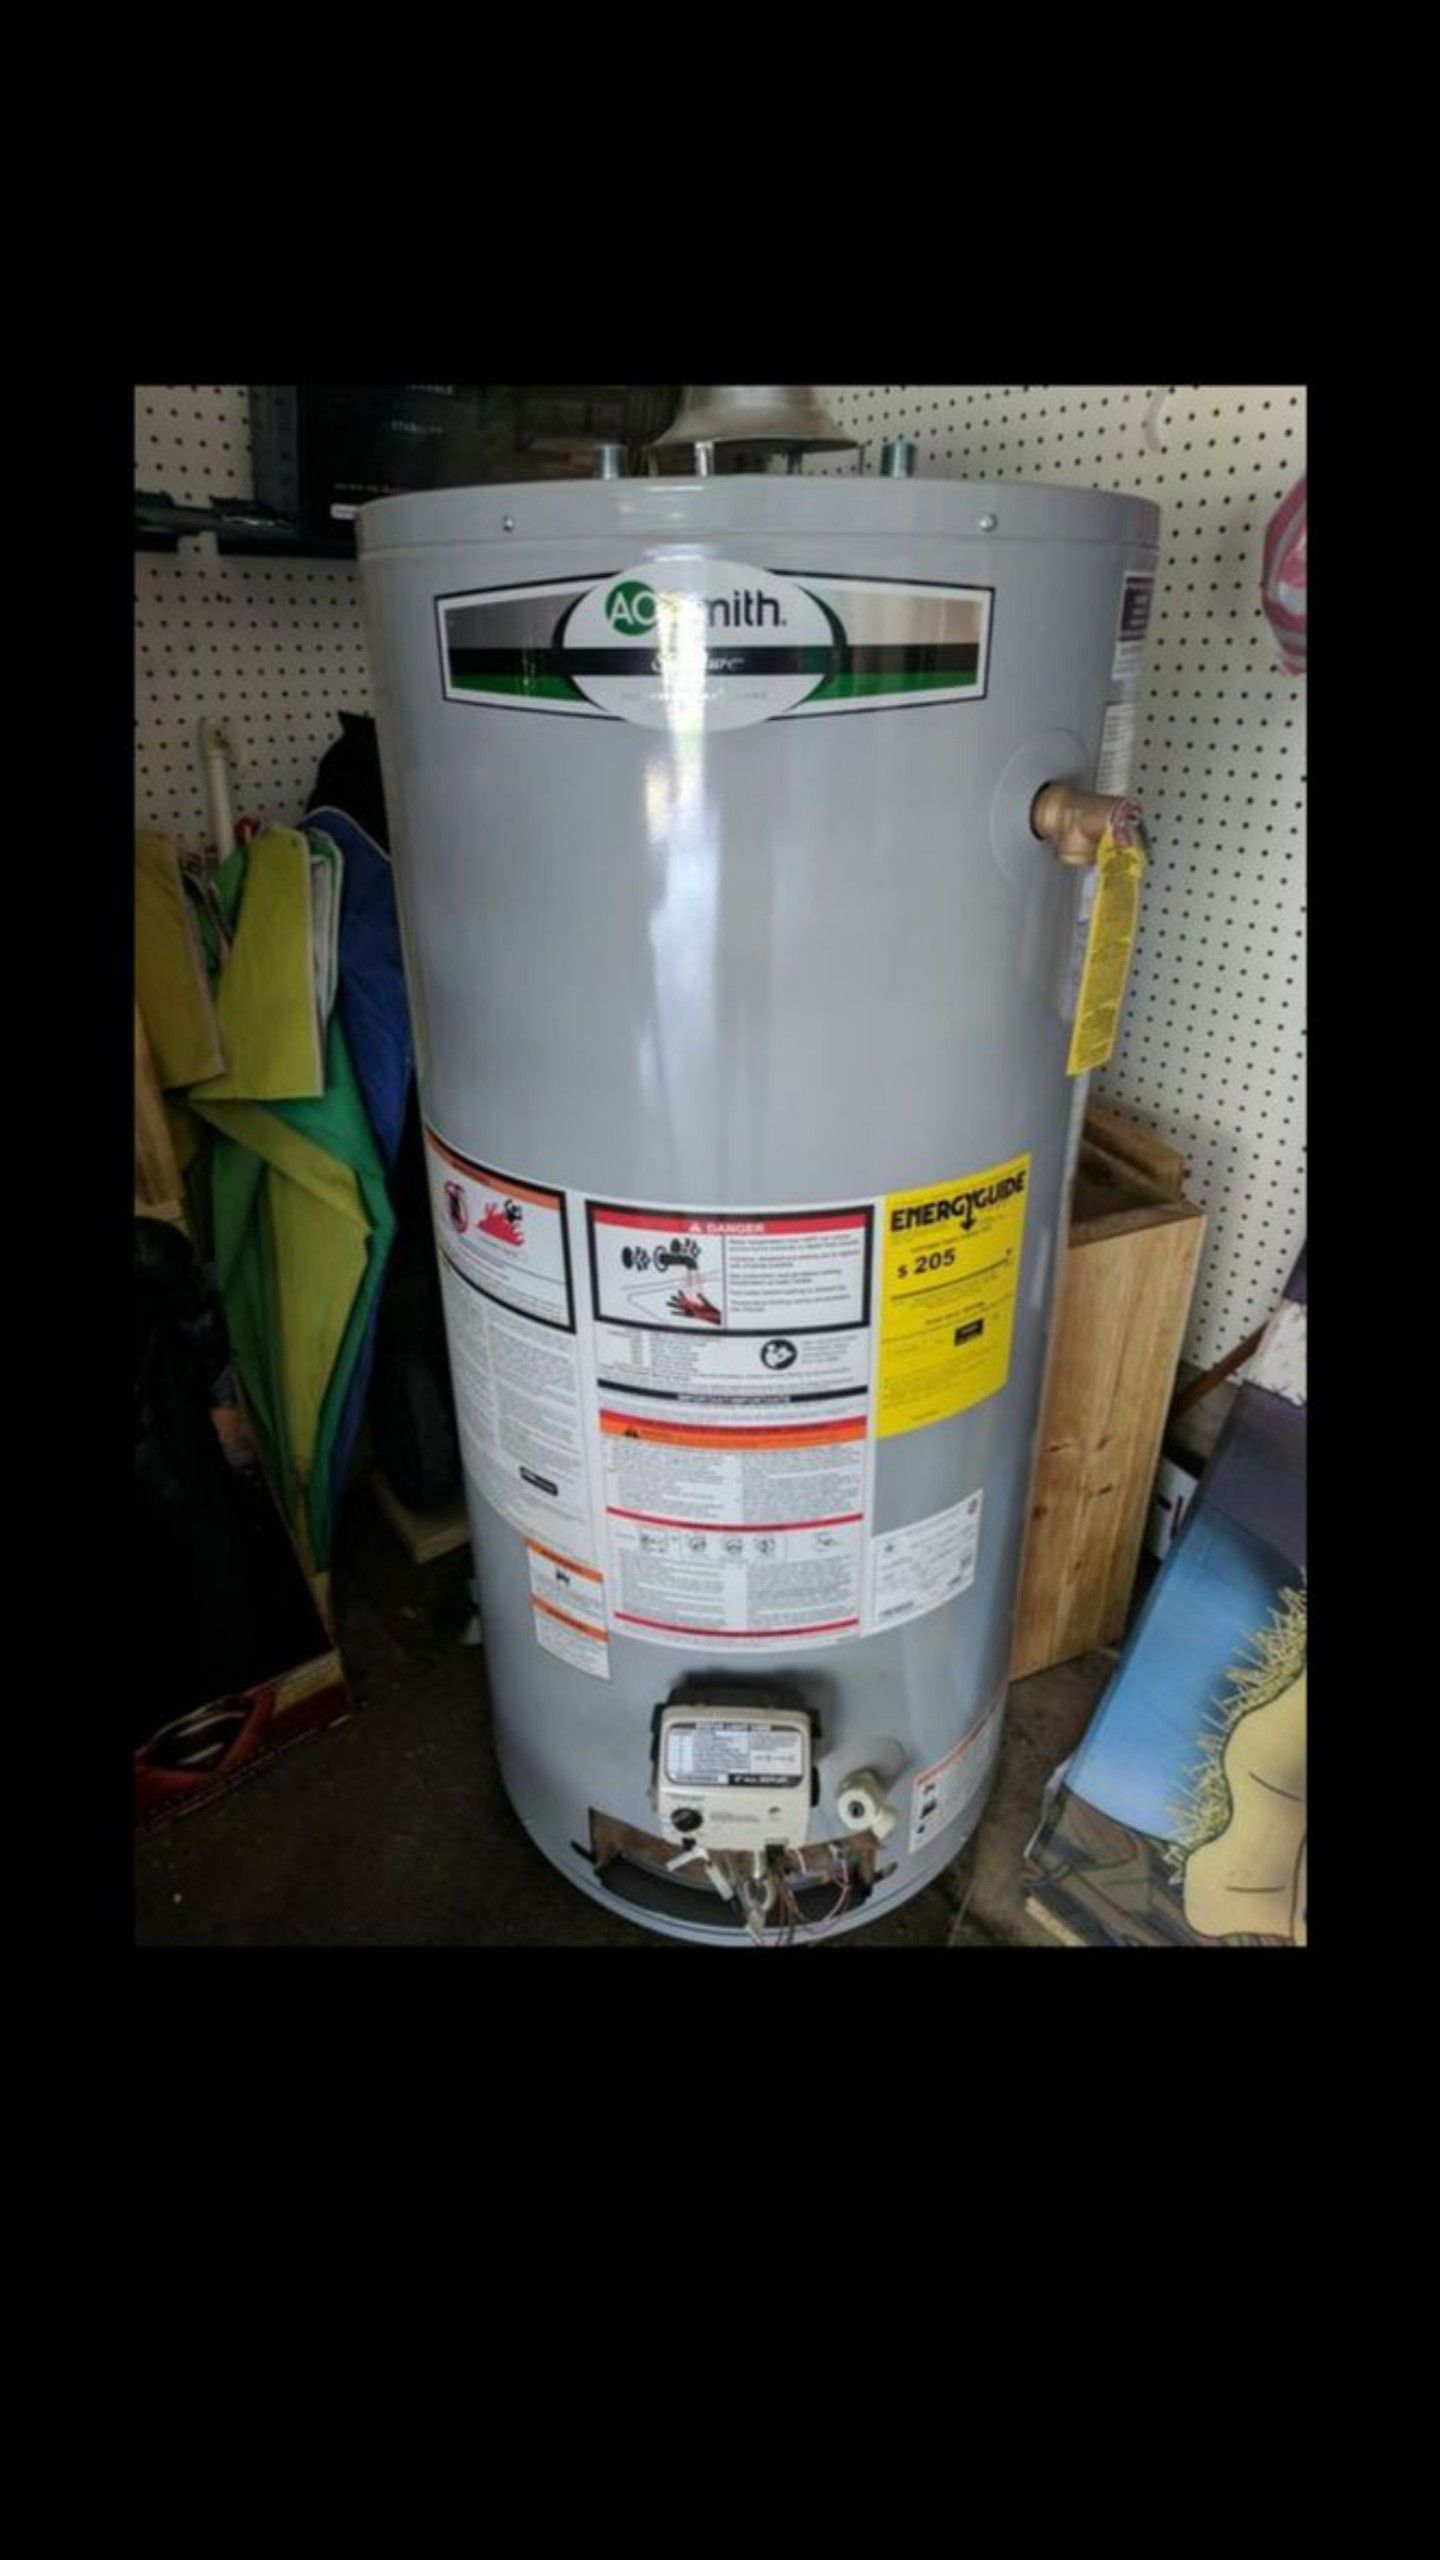 New 40 gallon gas water heater out of box